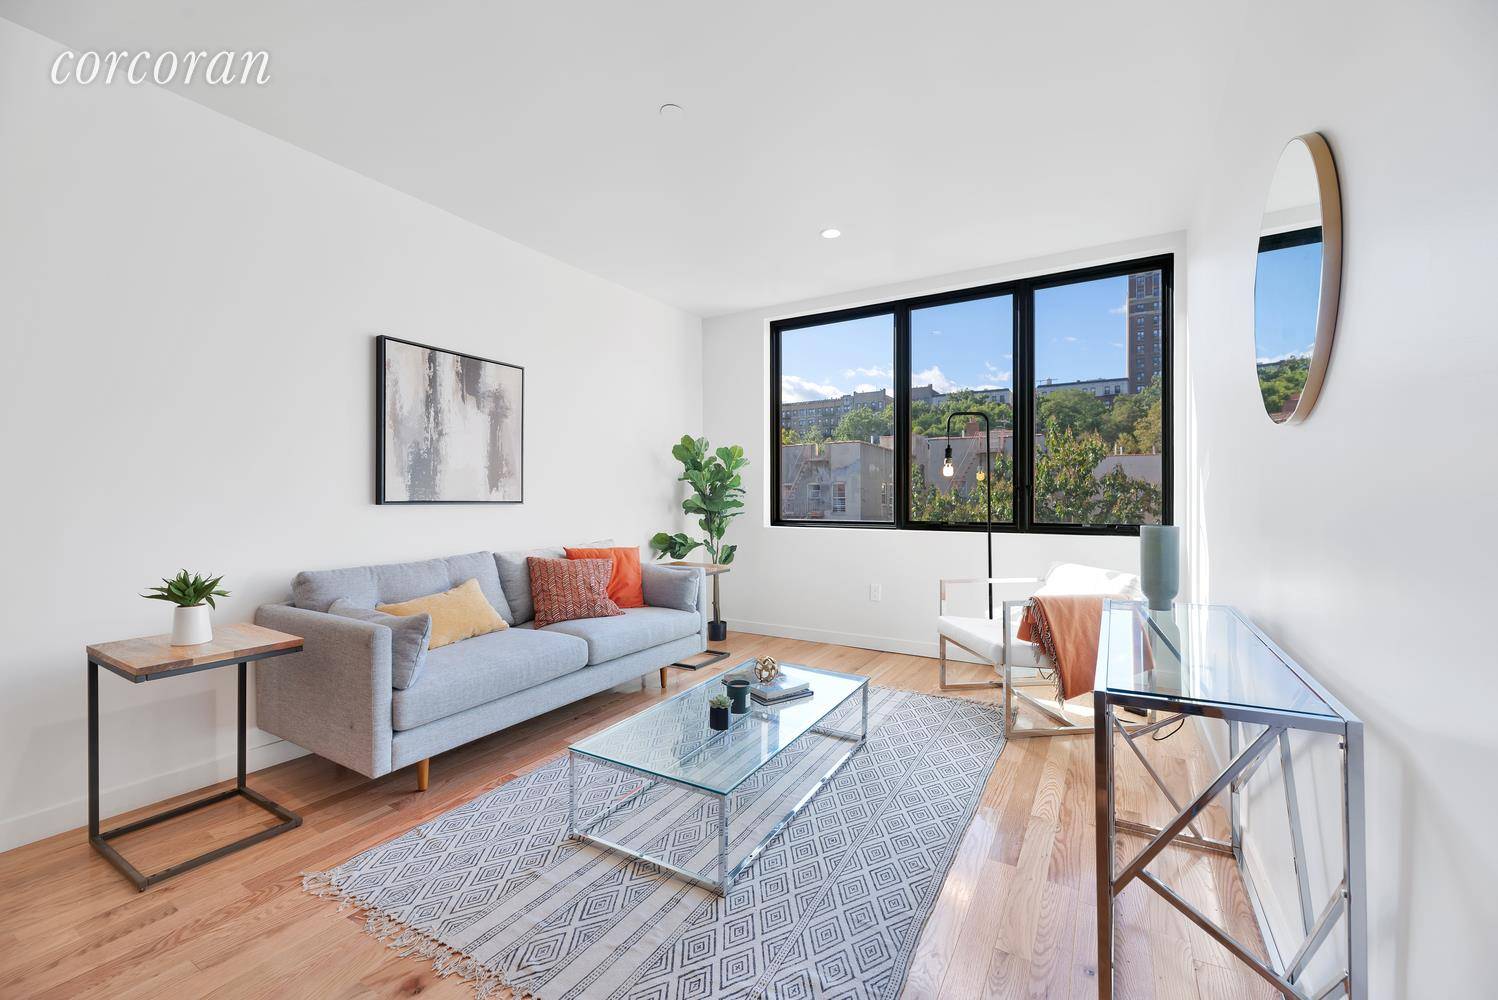 This impeccably designed Penthouse features a one of a kind design a two beds, two baths duplex with space for an at home office and dramatic high ceilings.